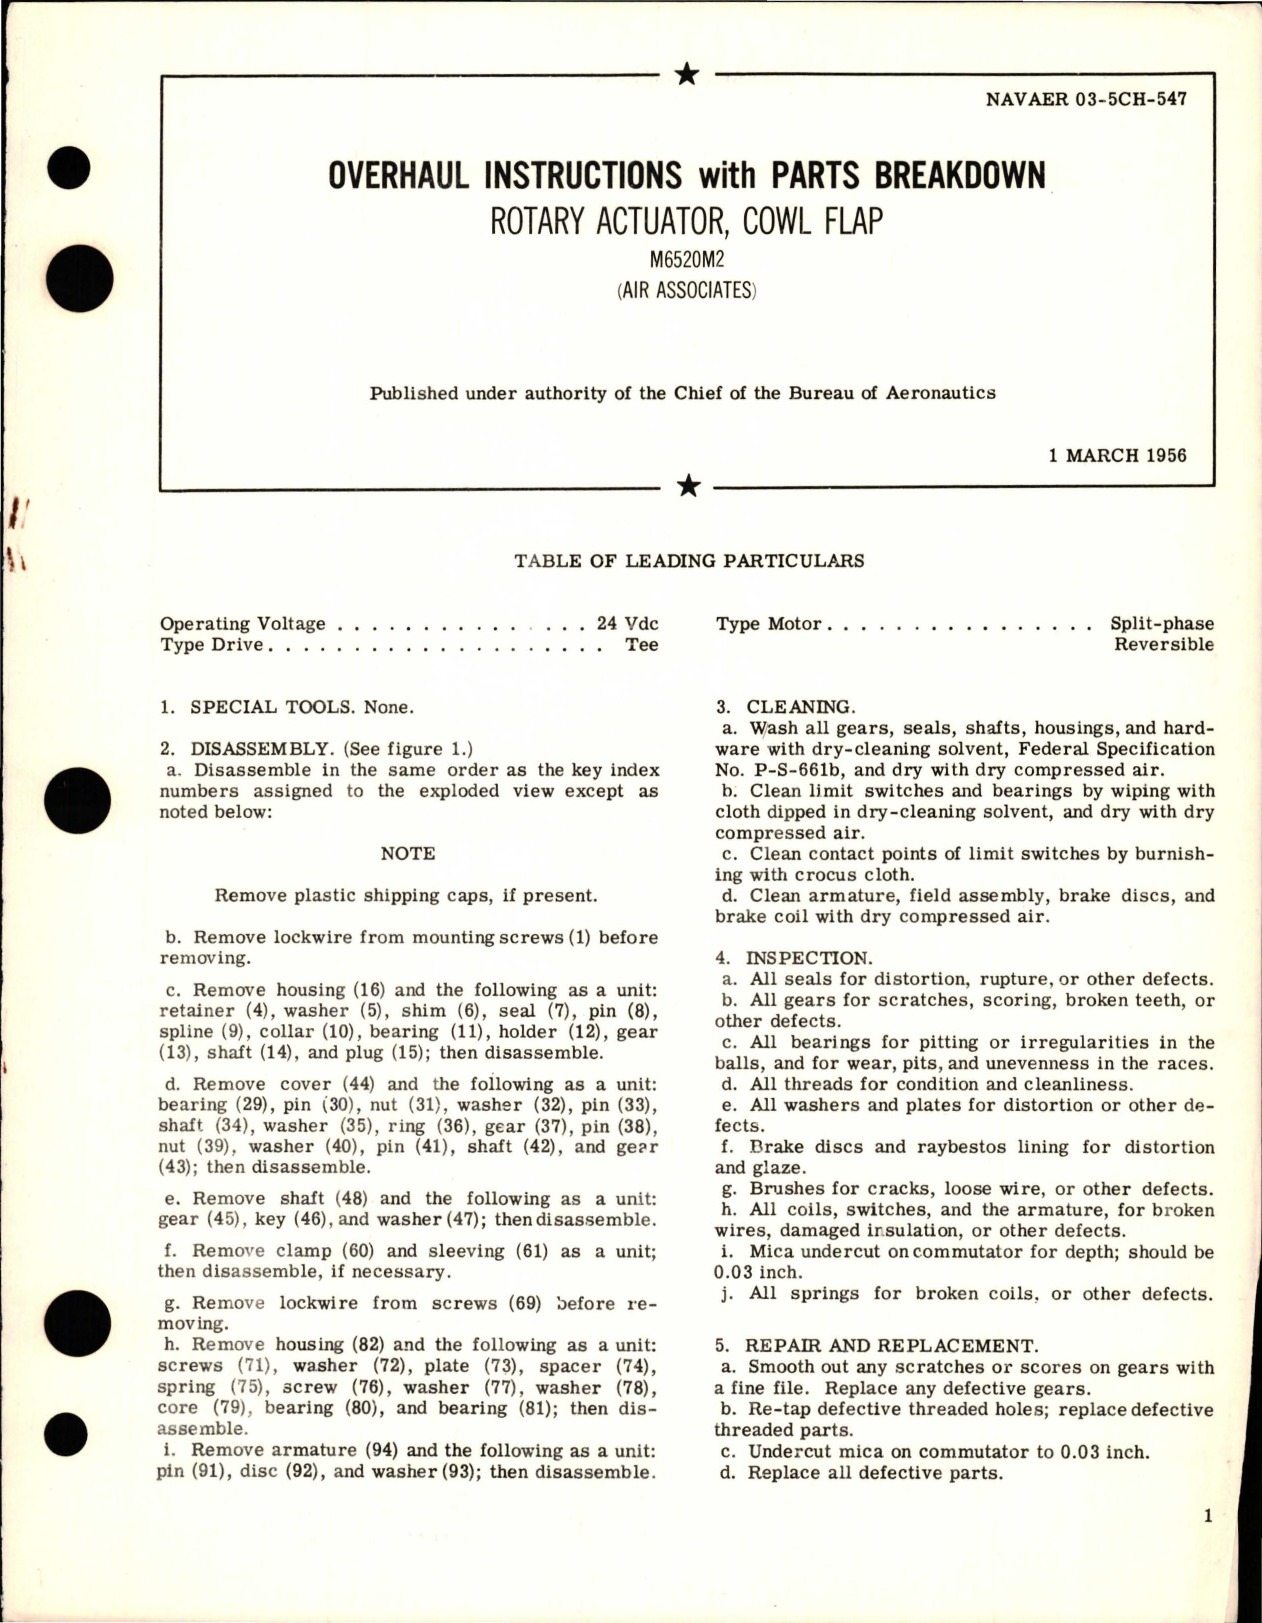 Sample page 1 from AirCorps Library document: Overhaul Instructions with Parts Breakdown for Cowl Flap Rotary Actuator - M6520M2